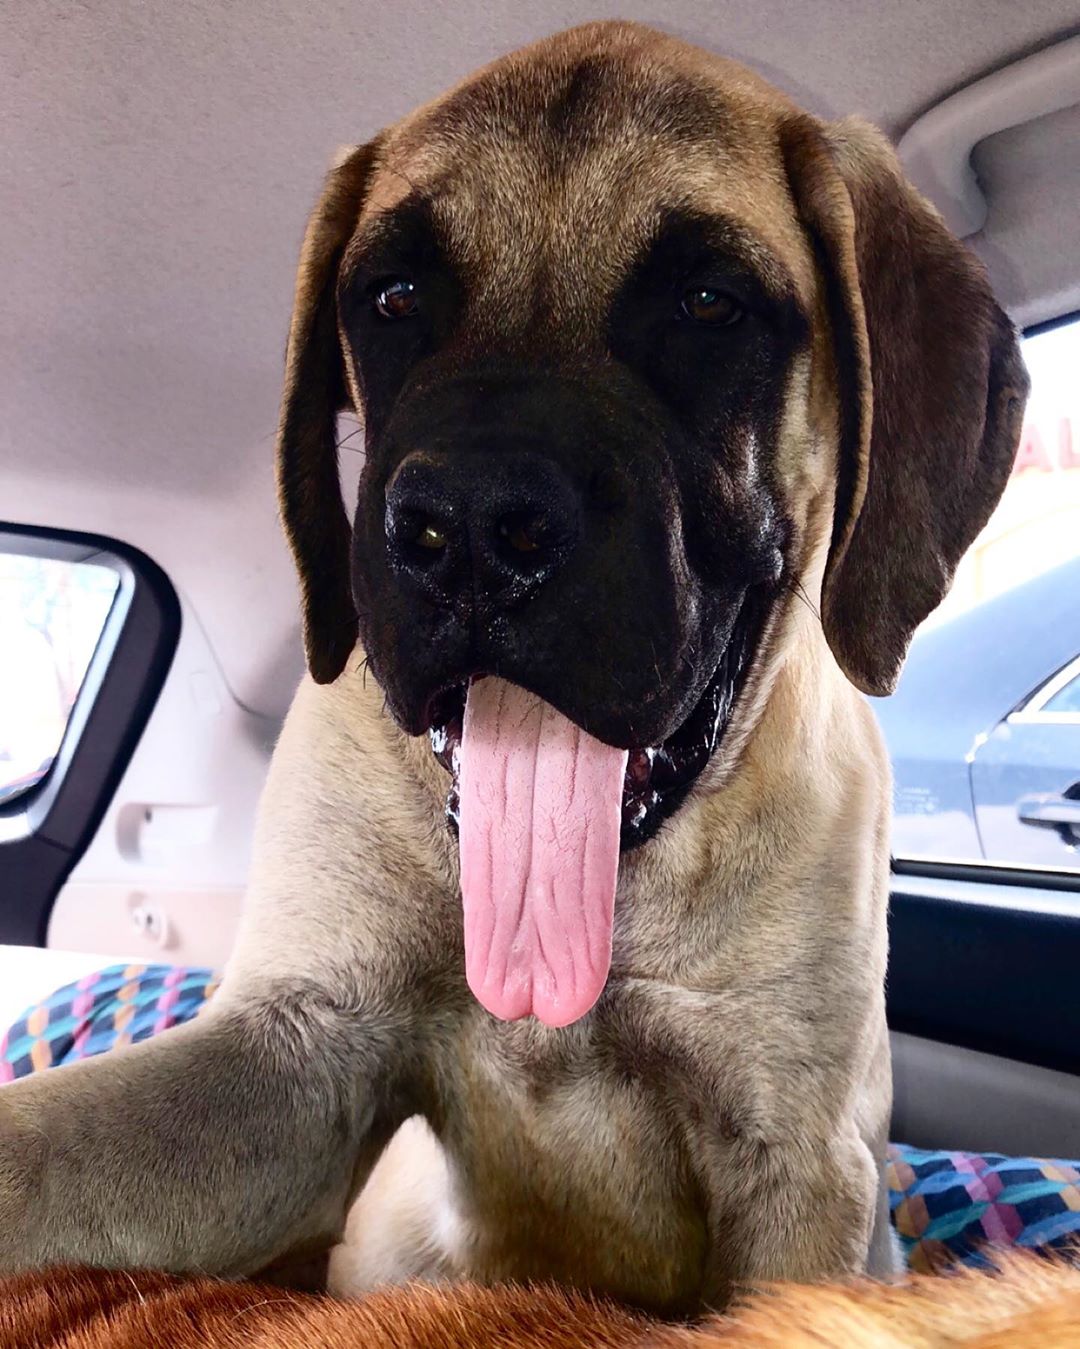 A Mastiff in the car trunk with its tongue out